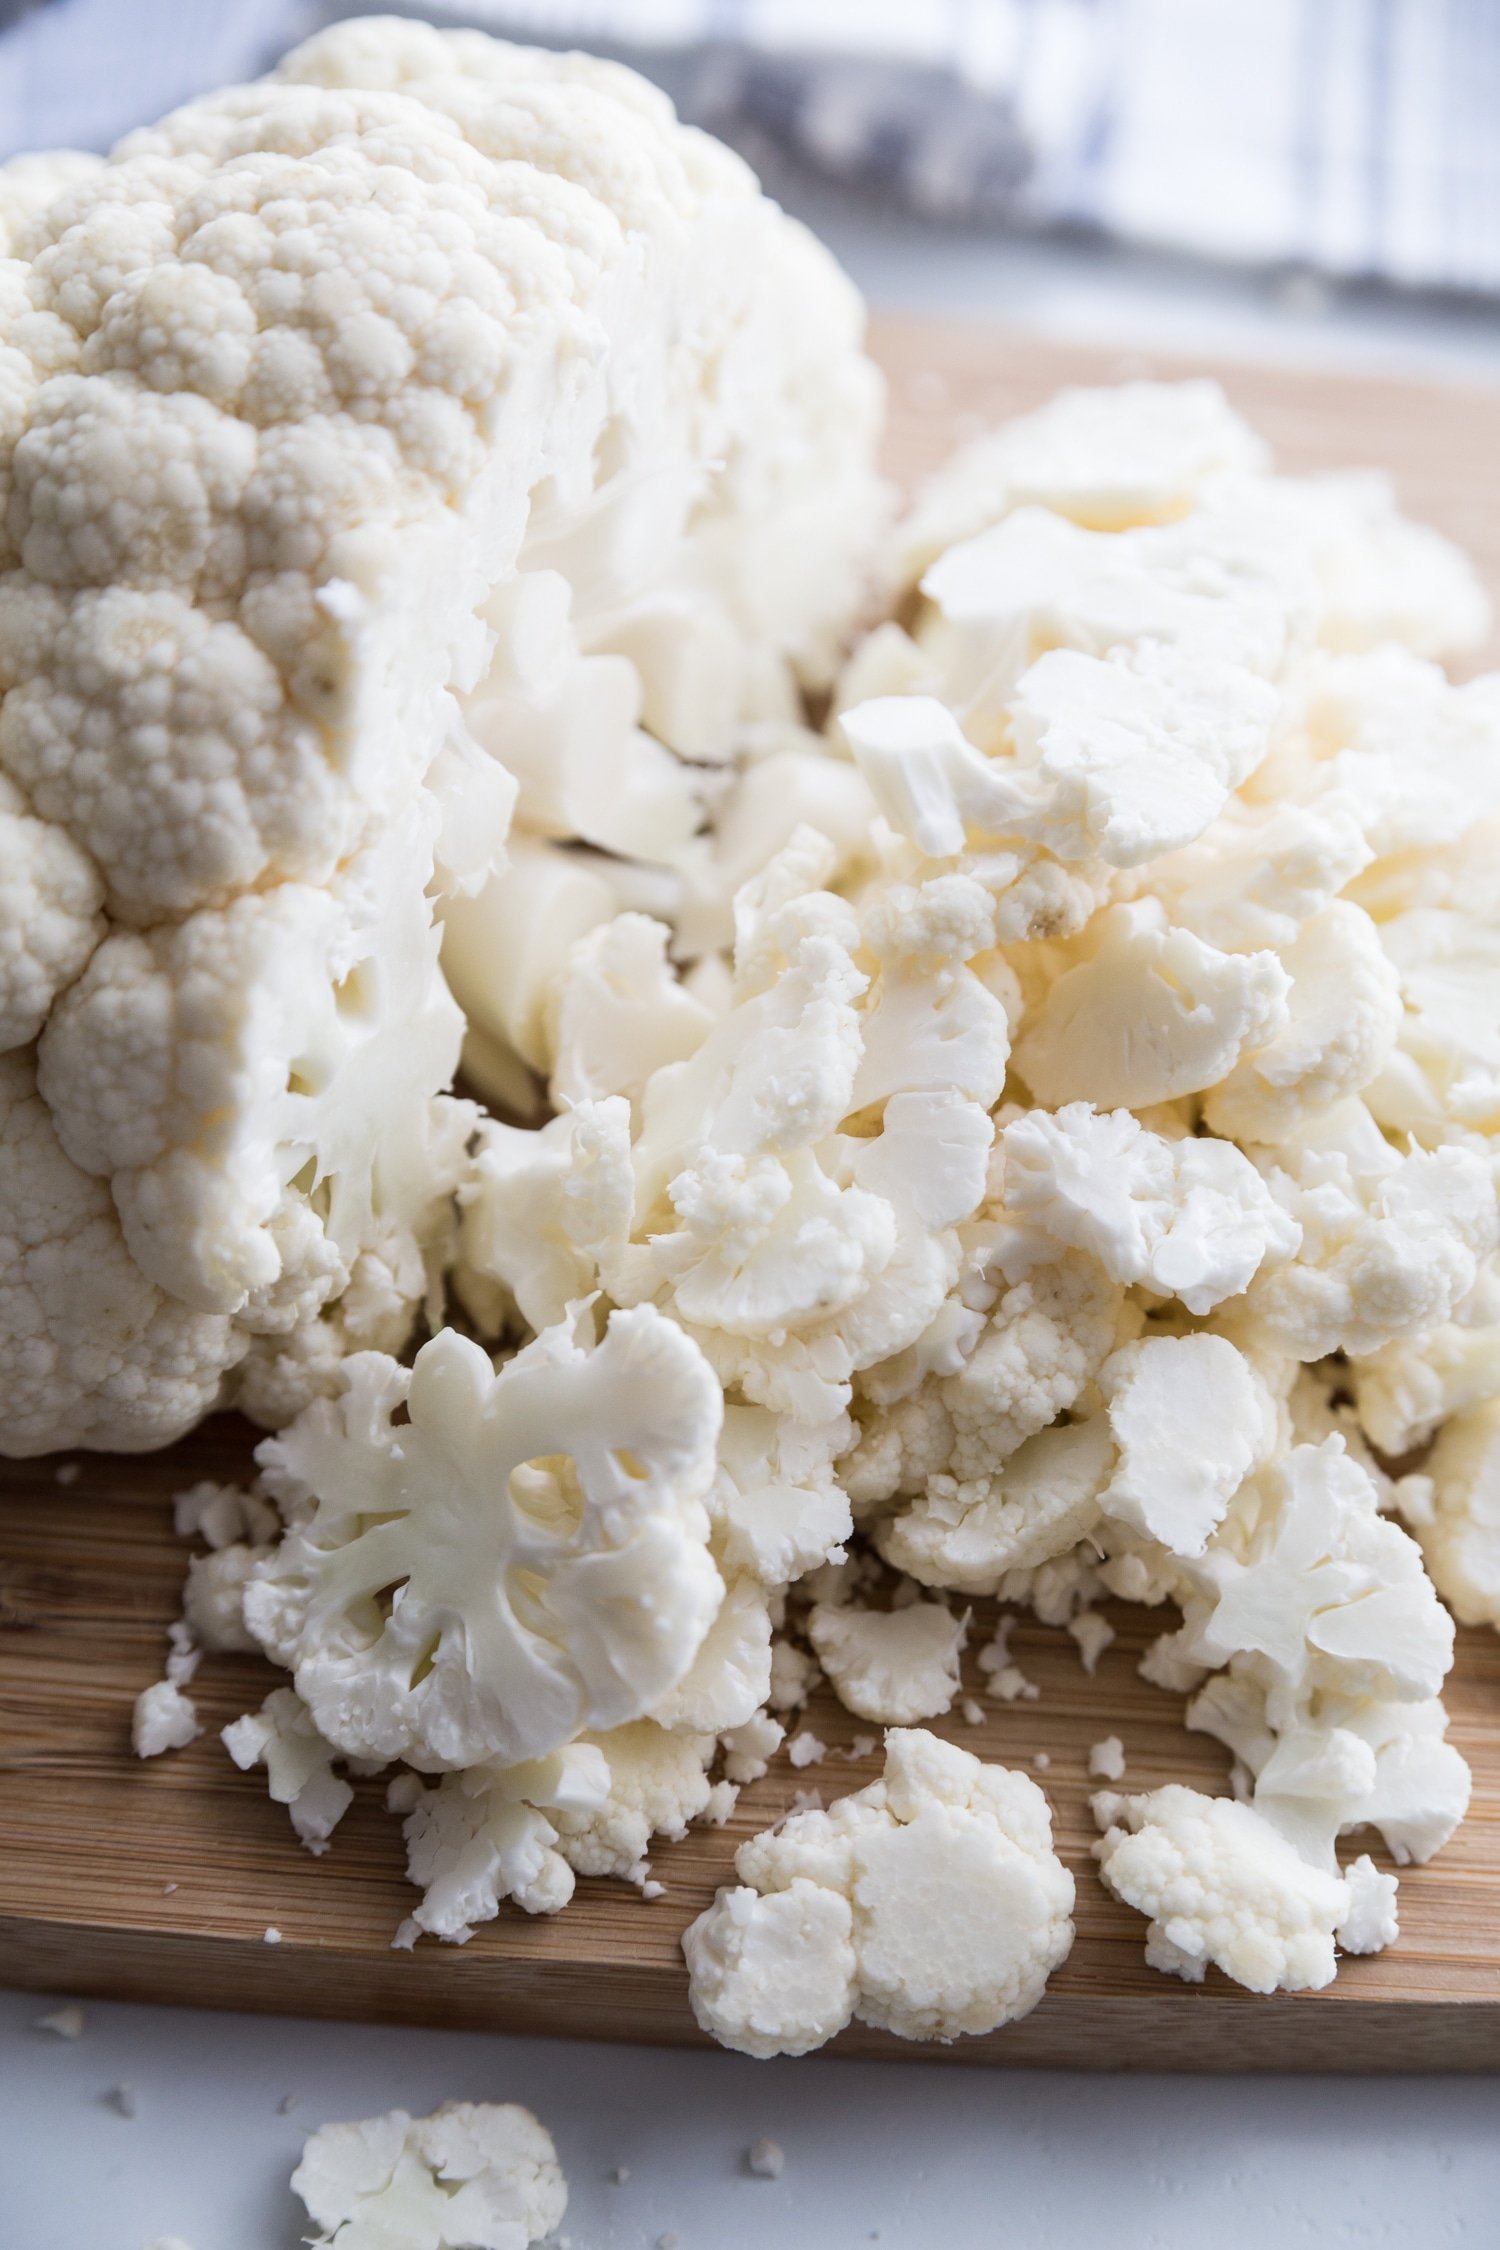 A head of cauliflower being chopped into thin florets.